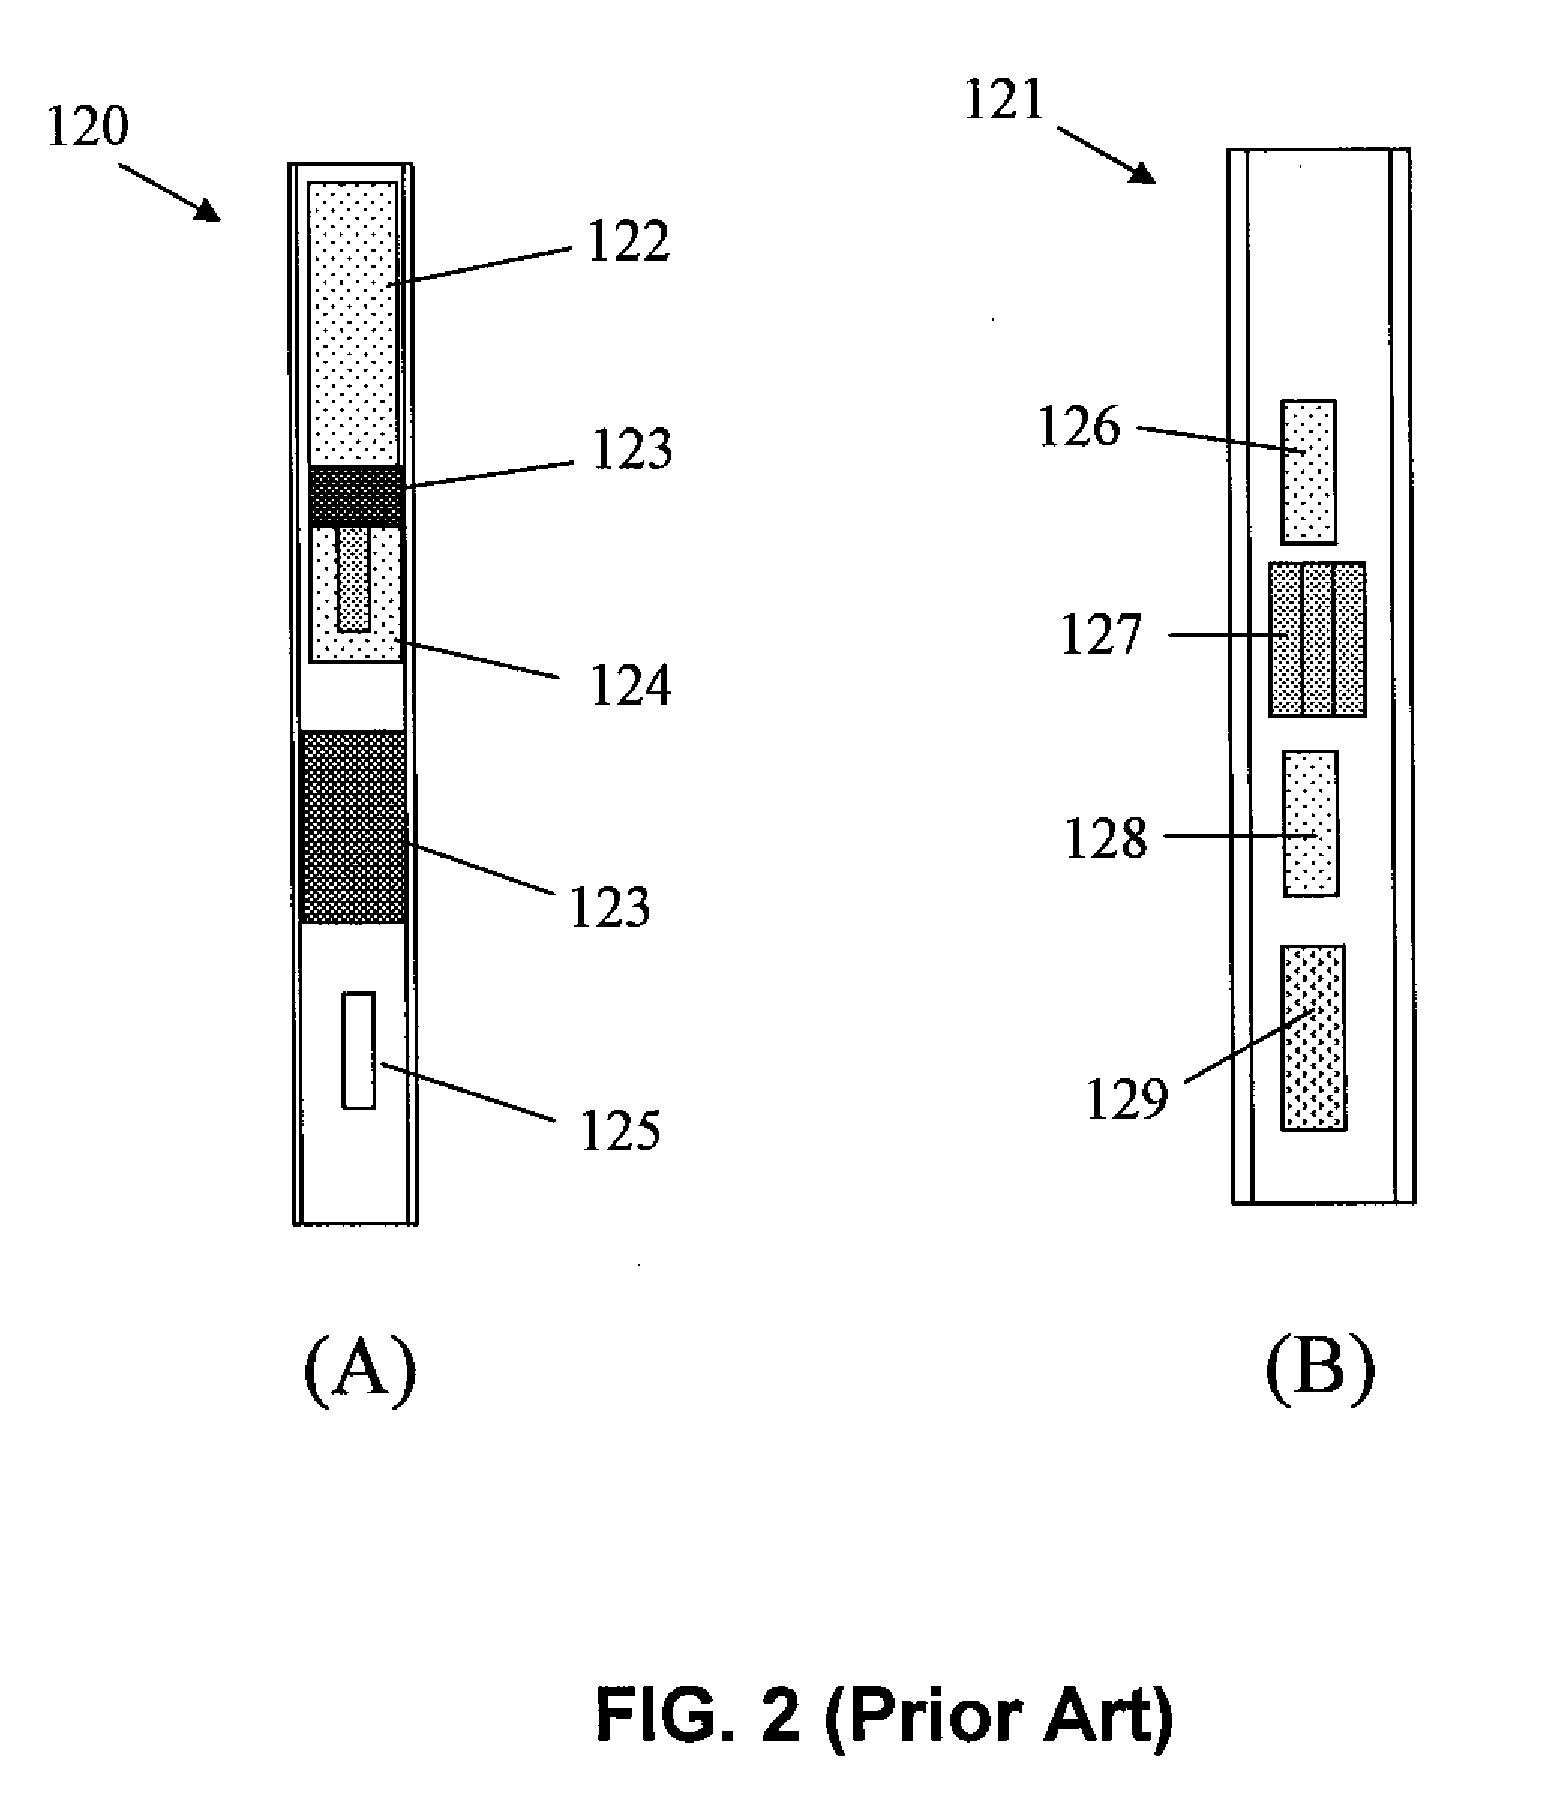 Downhole Tools with Solid-State Neutron Monitors